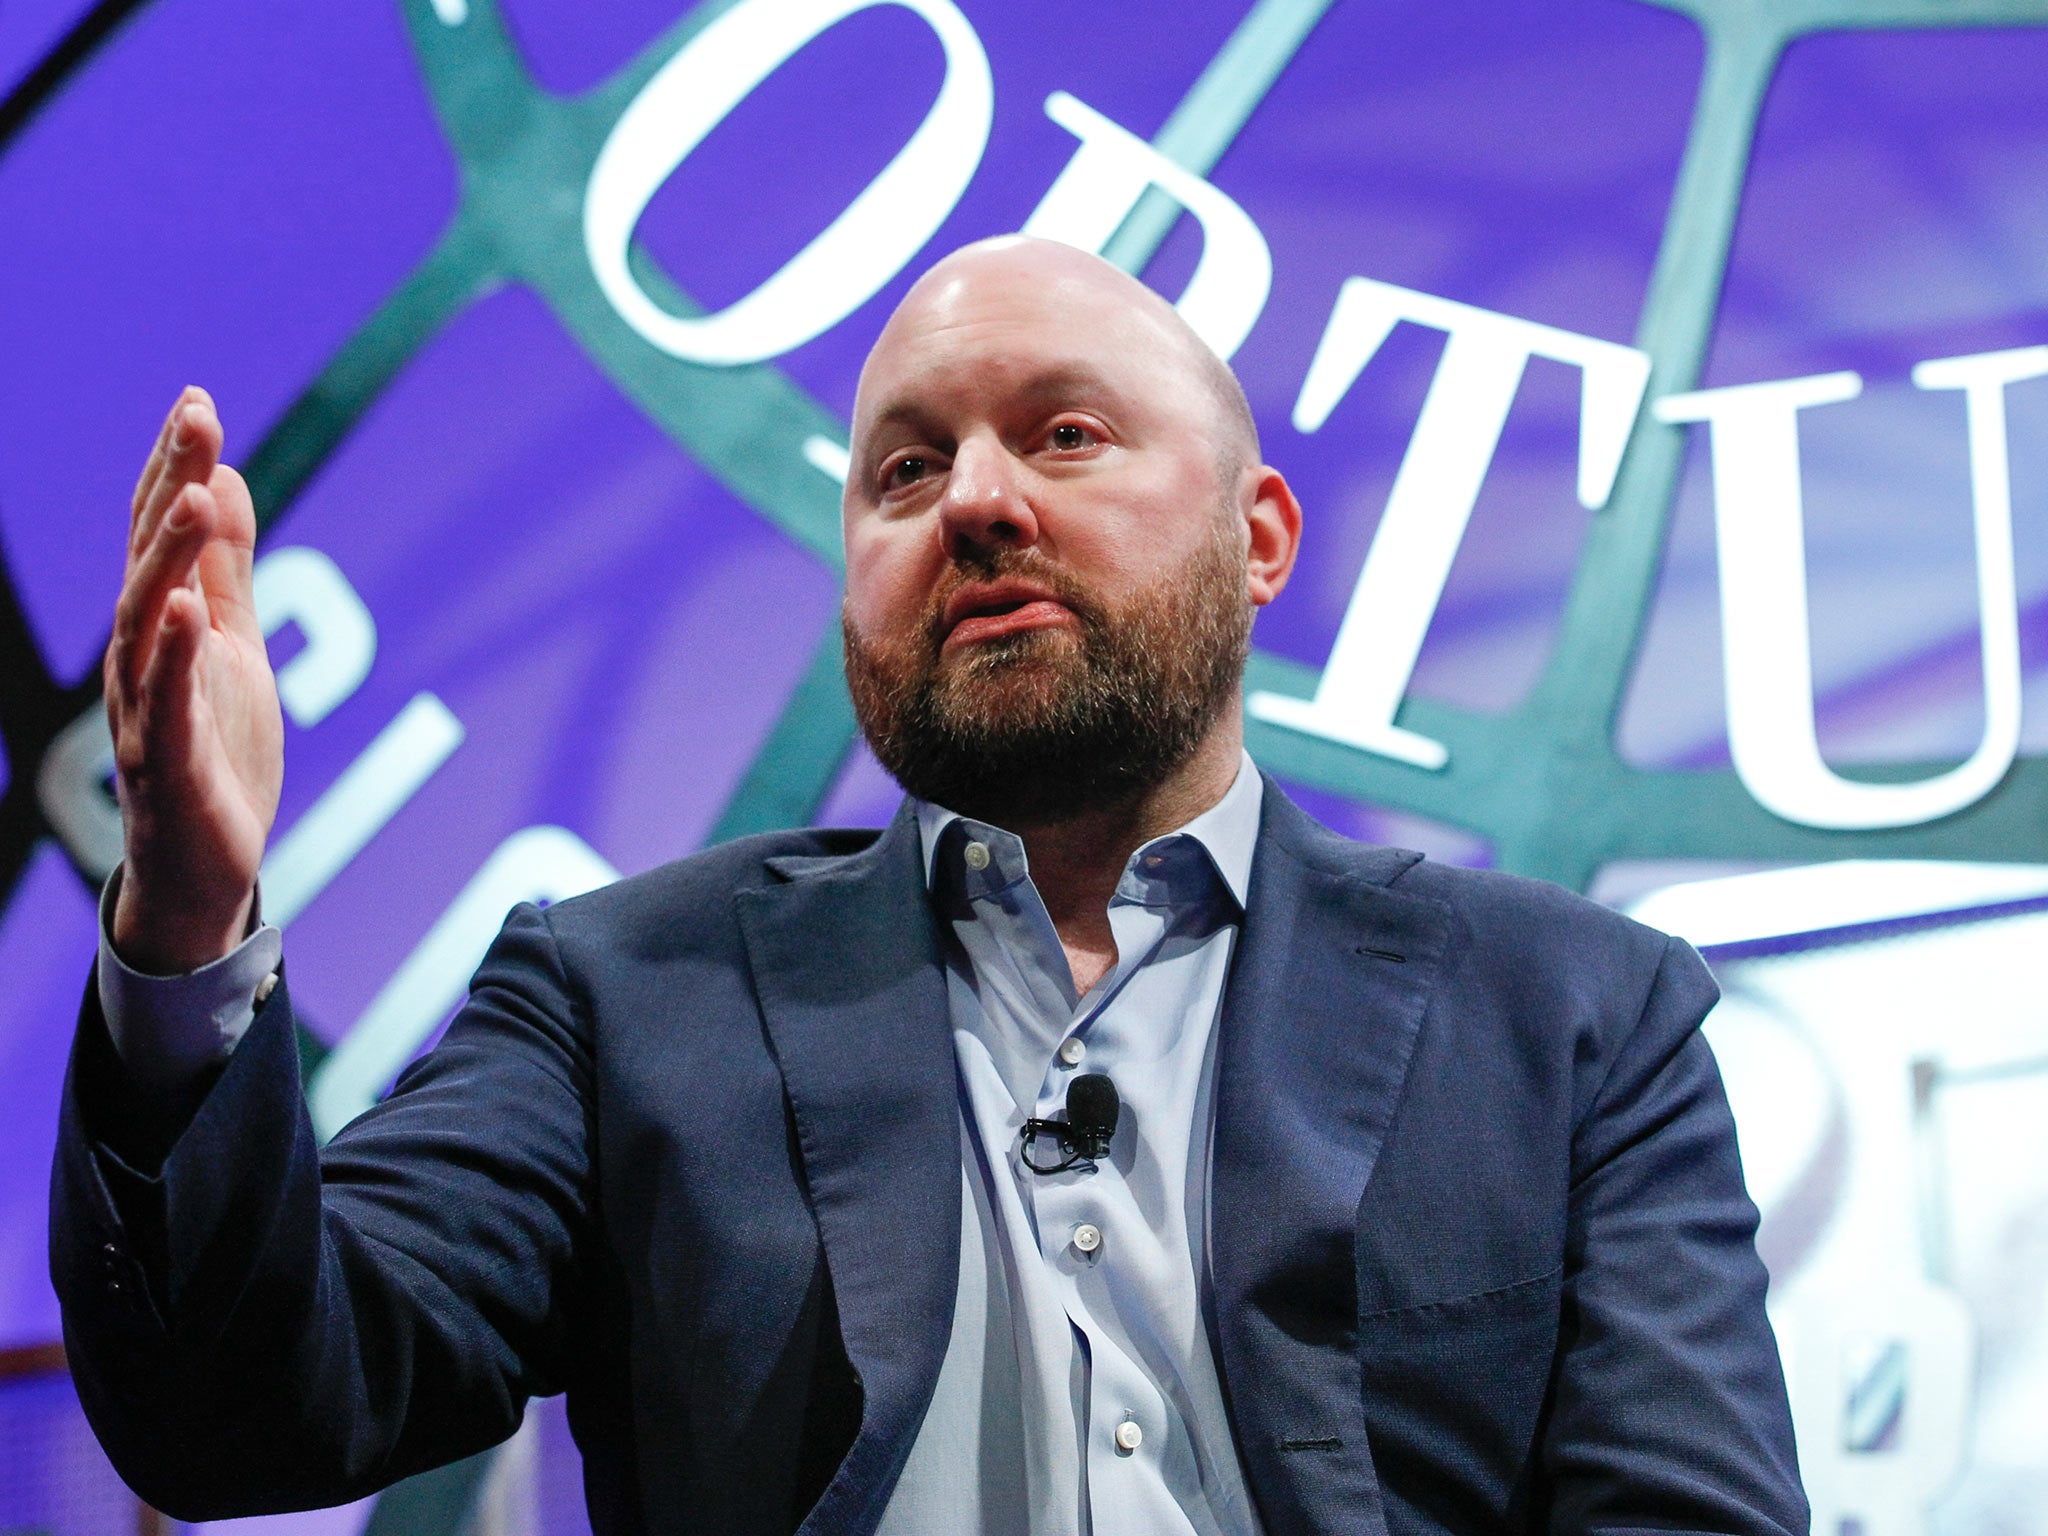 Tech investor Marc Andreessen was reported to be part of a team poised to bid. But that appears unlikely